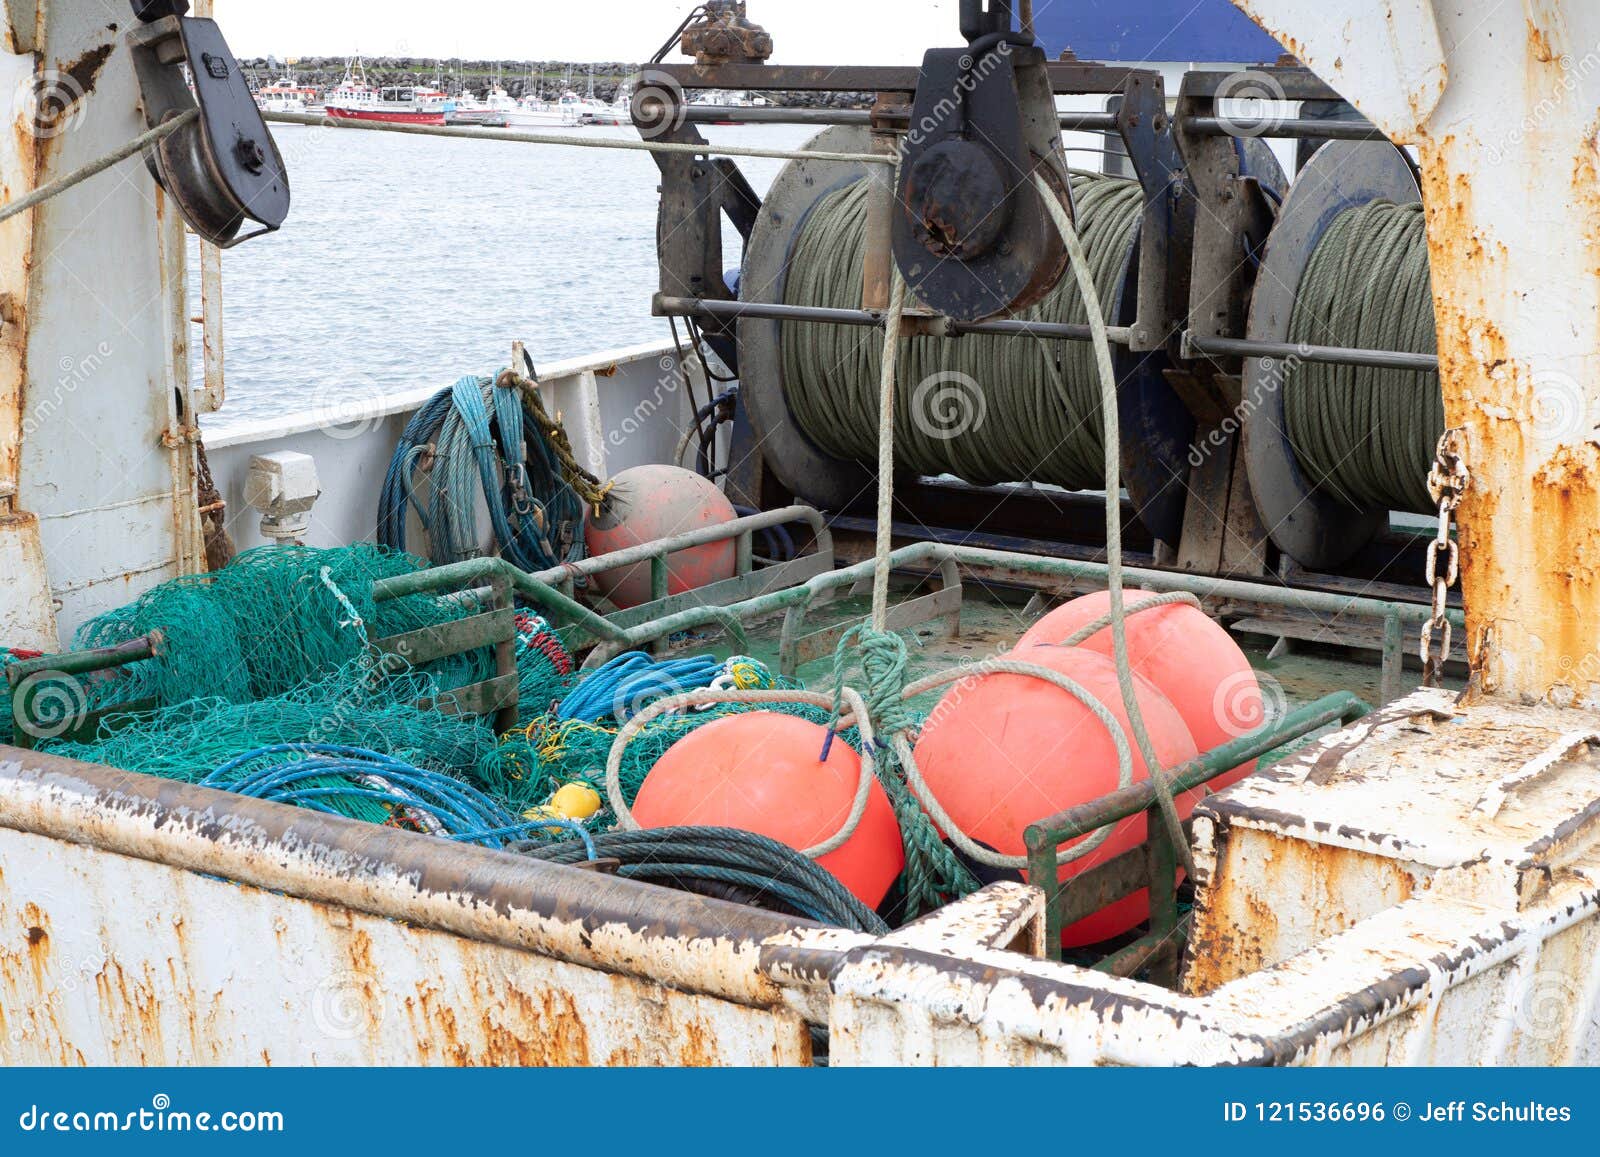 Commercial Fishing Gear stock photo. Image of fish, industry